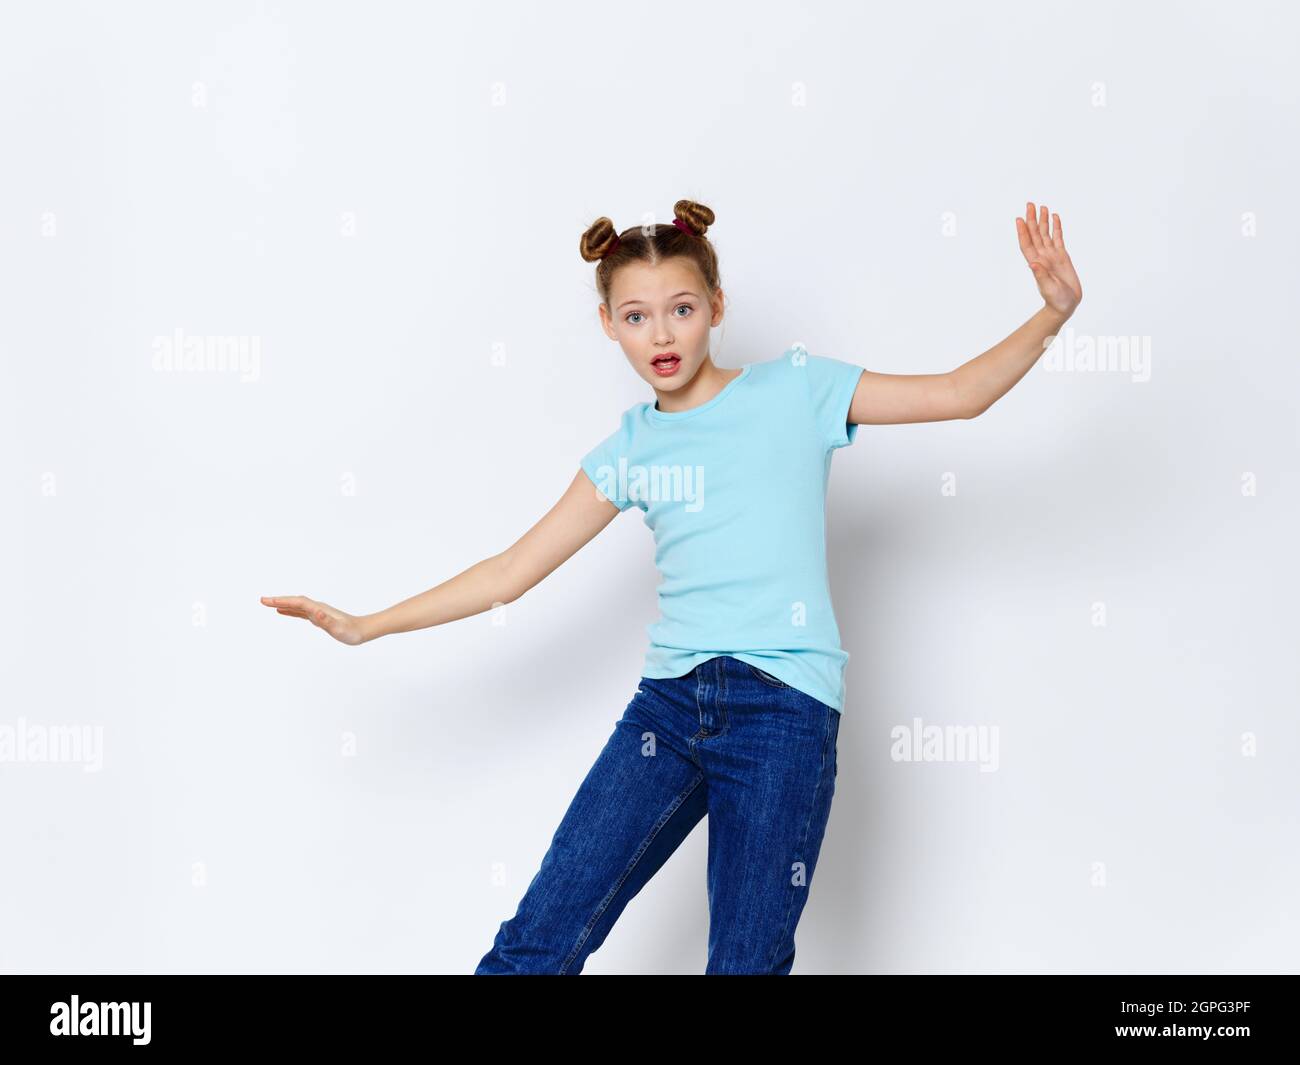 happy little girl with hairstyle blue t-shirt jeans model Stock Photo -  Alamy